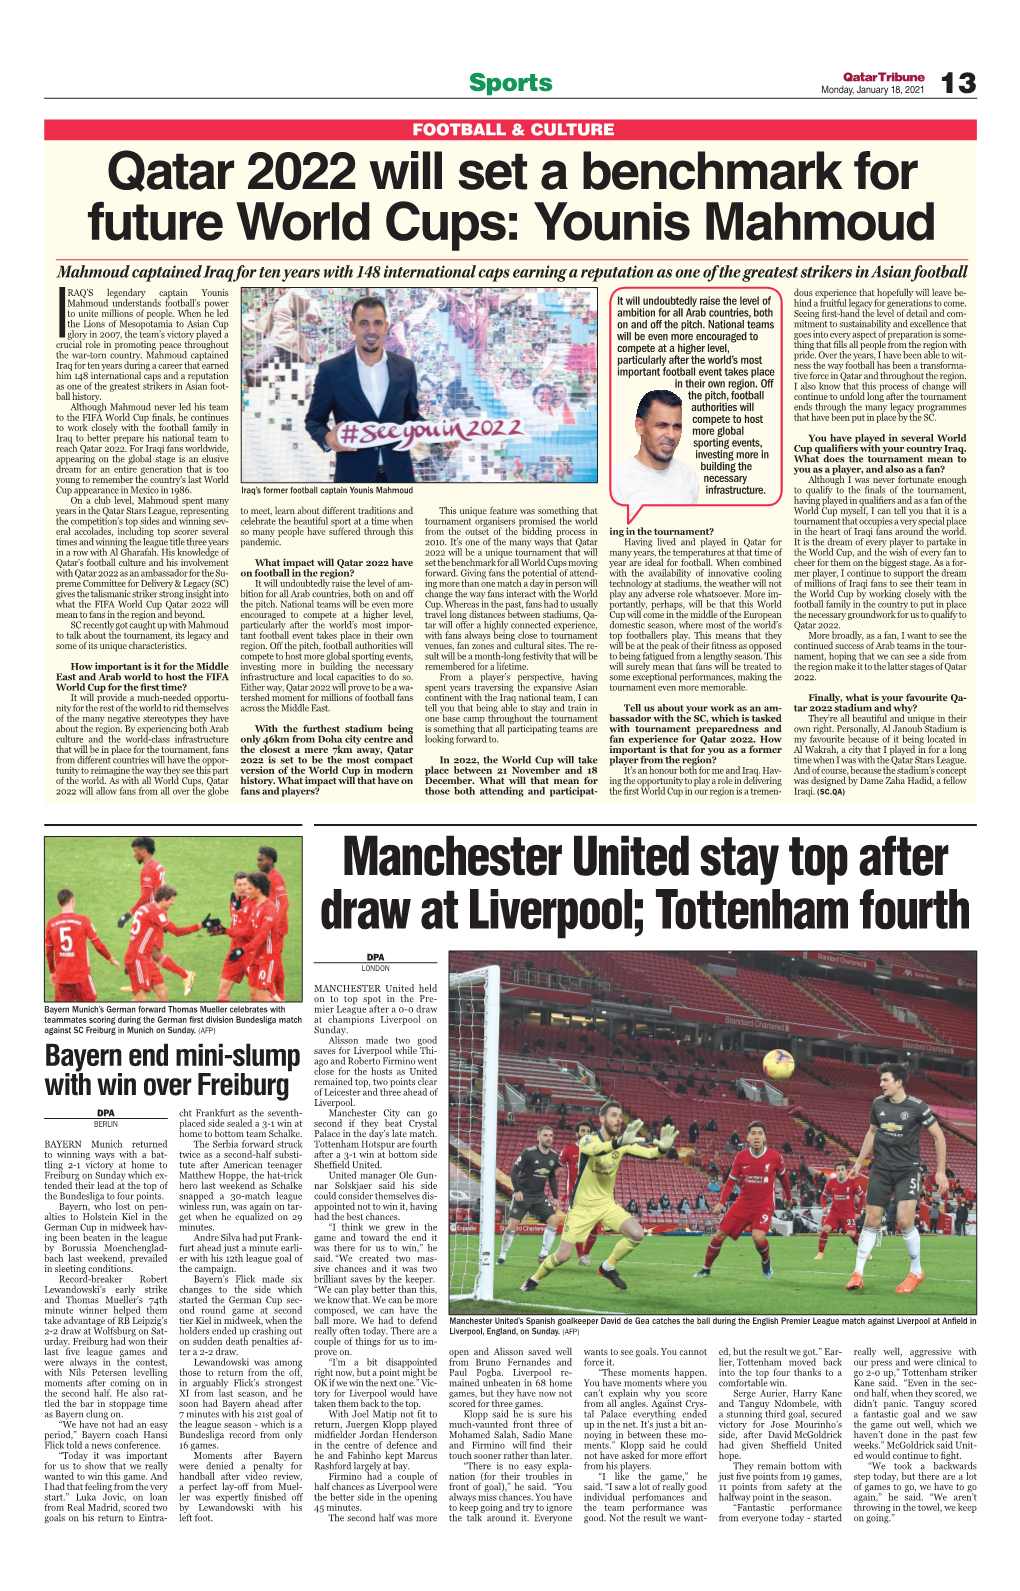 Qatar 2022 Will Set a Benchmark for Future World Cups: Younis Mahmoud Manchester United Stay Top After Draw at Liverpool; Tott